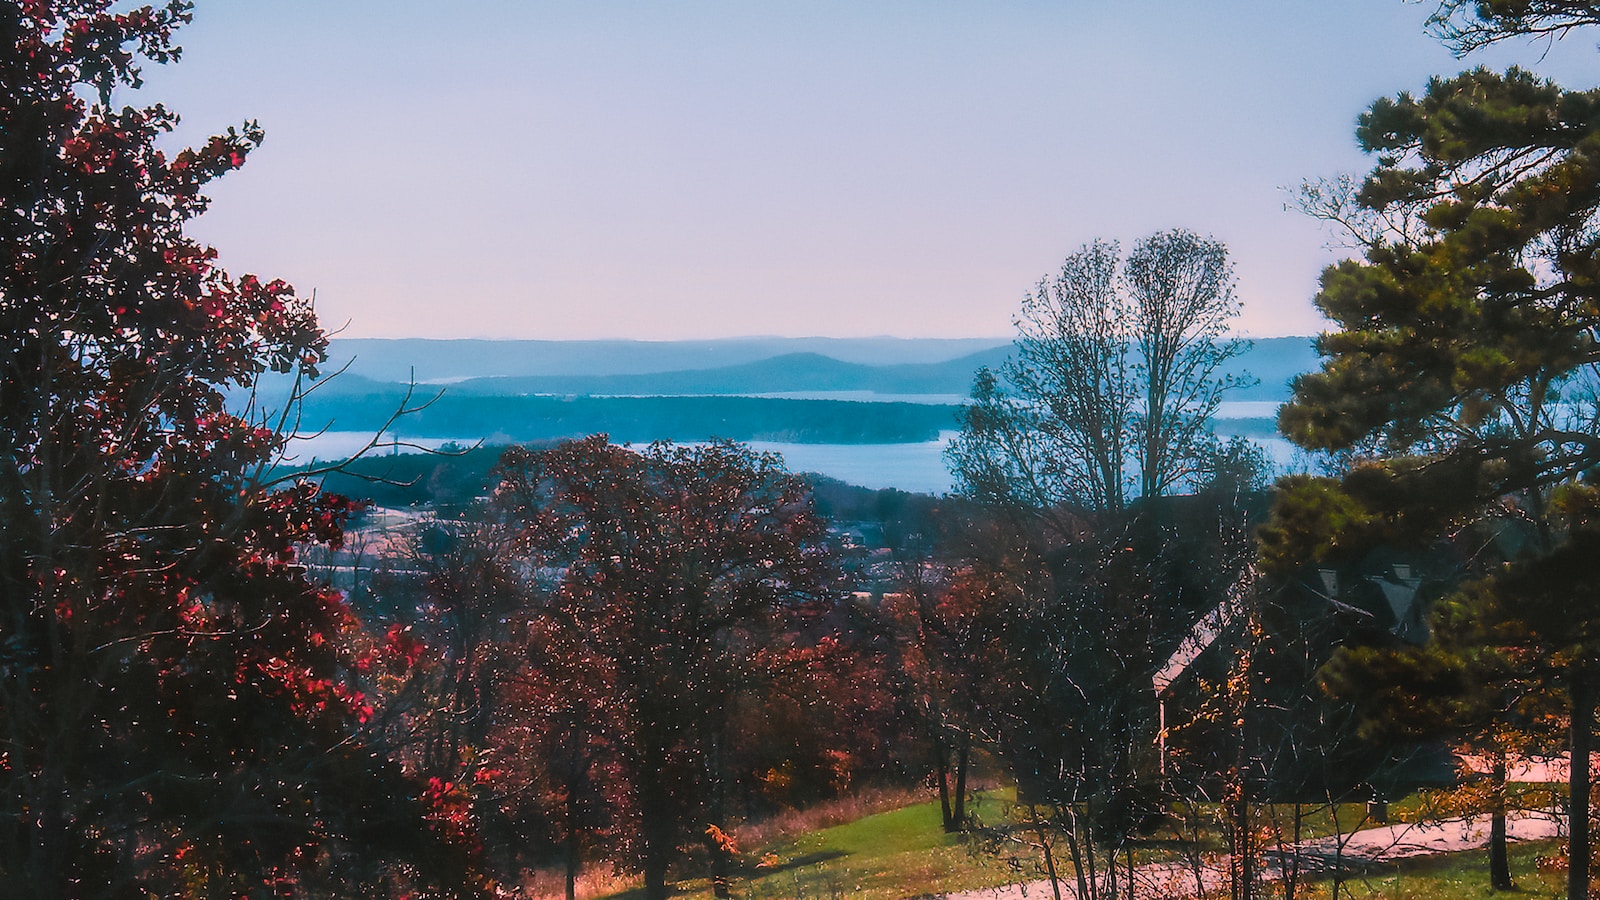 Branson Missouri, a scenic view of a lake and mountains in the distance